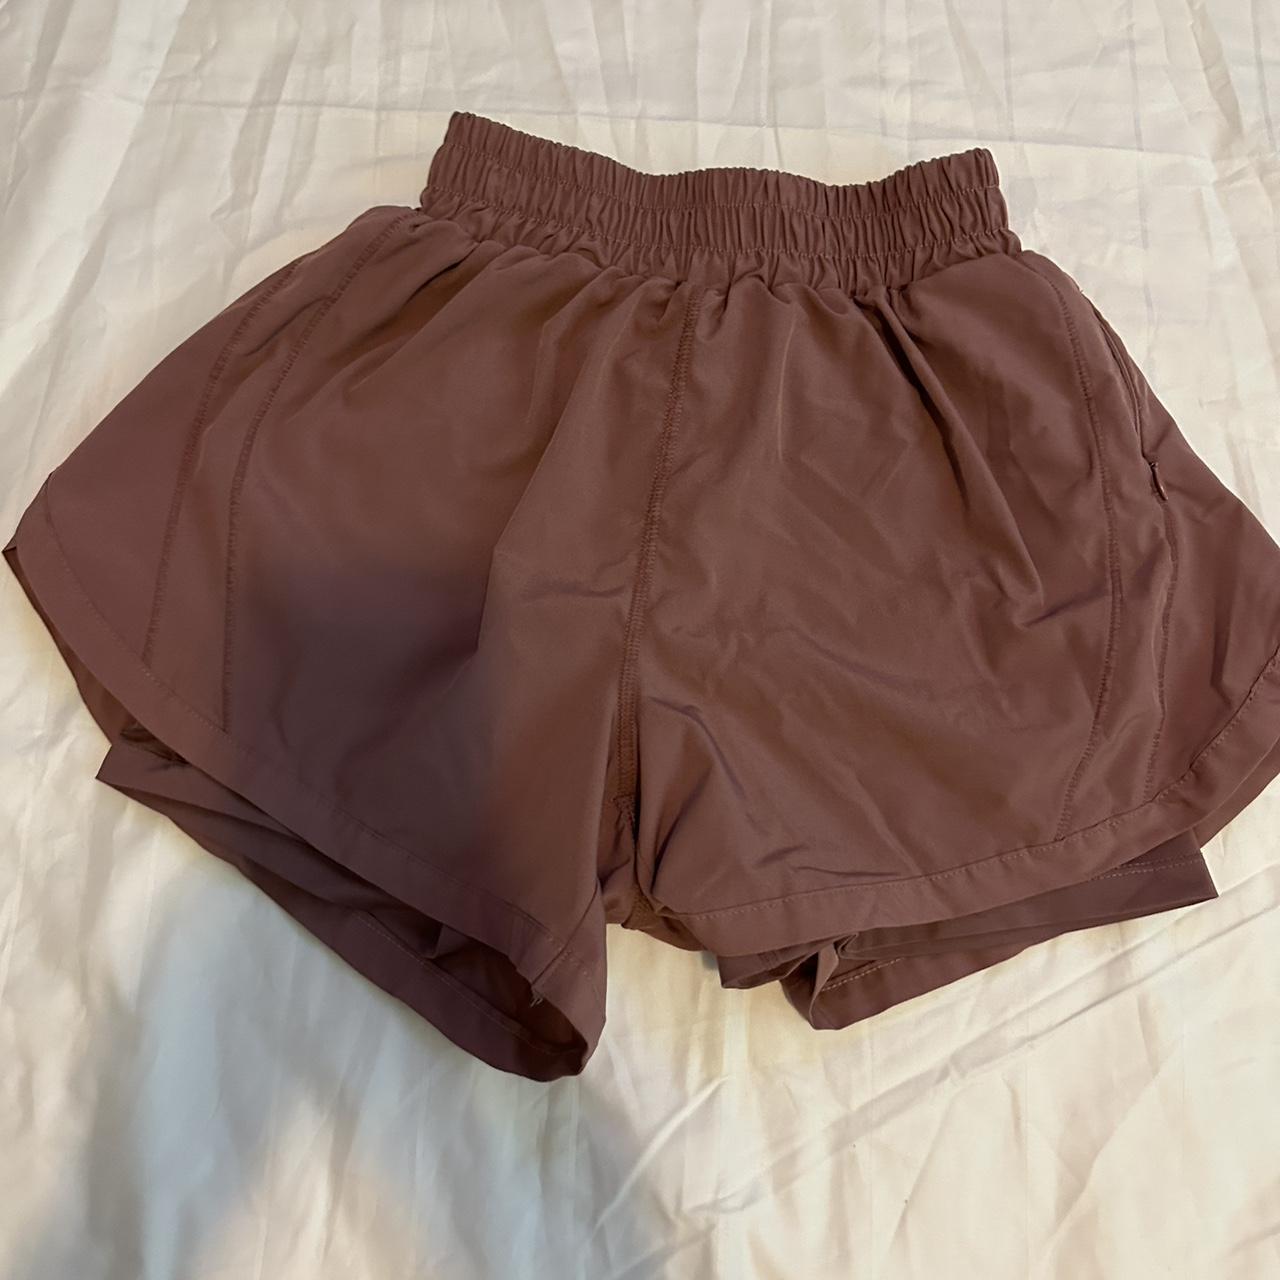 AS Revival Women's Burgundy and Pink Shorts